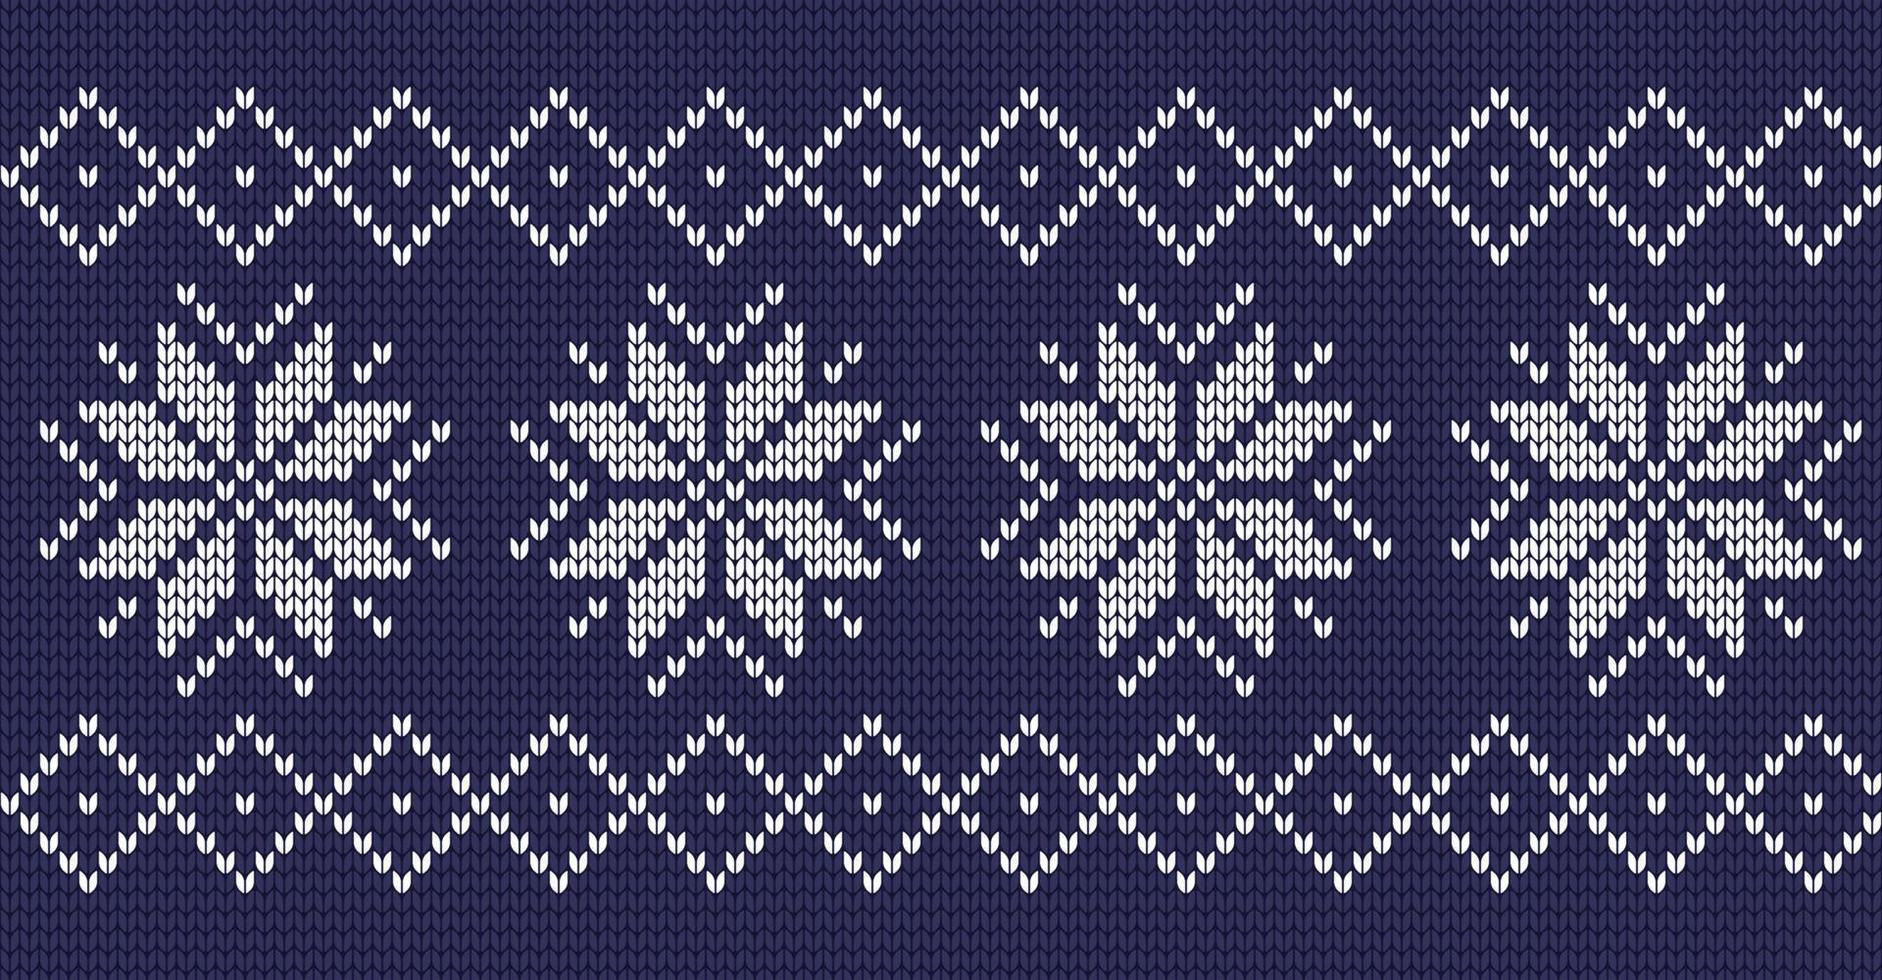 Knitted seamless pattern background vector illustration